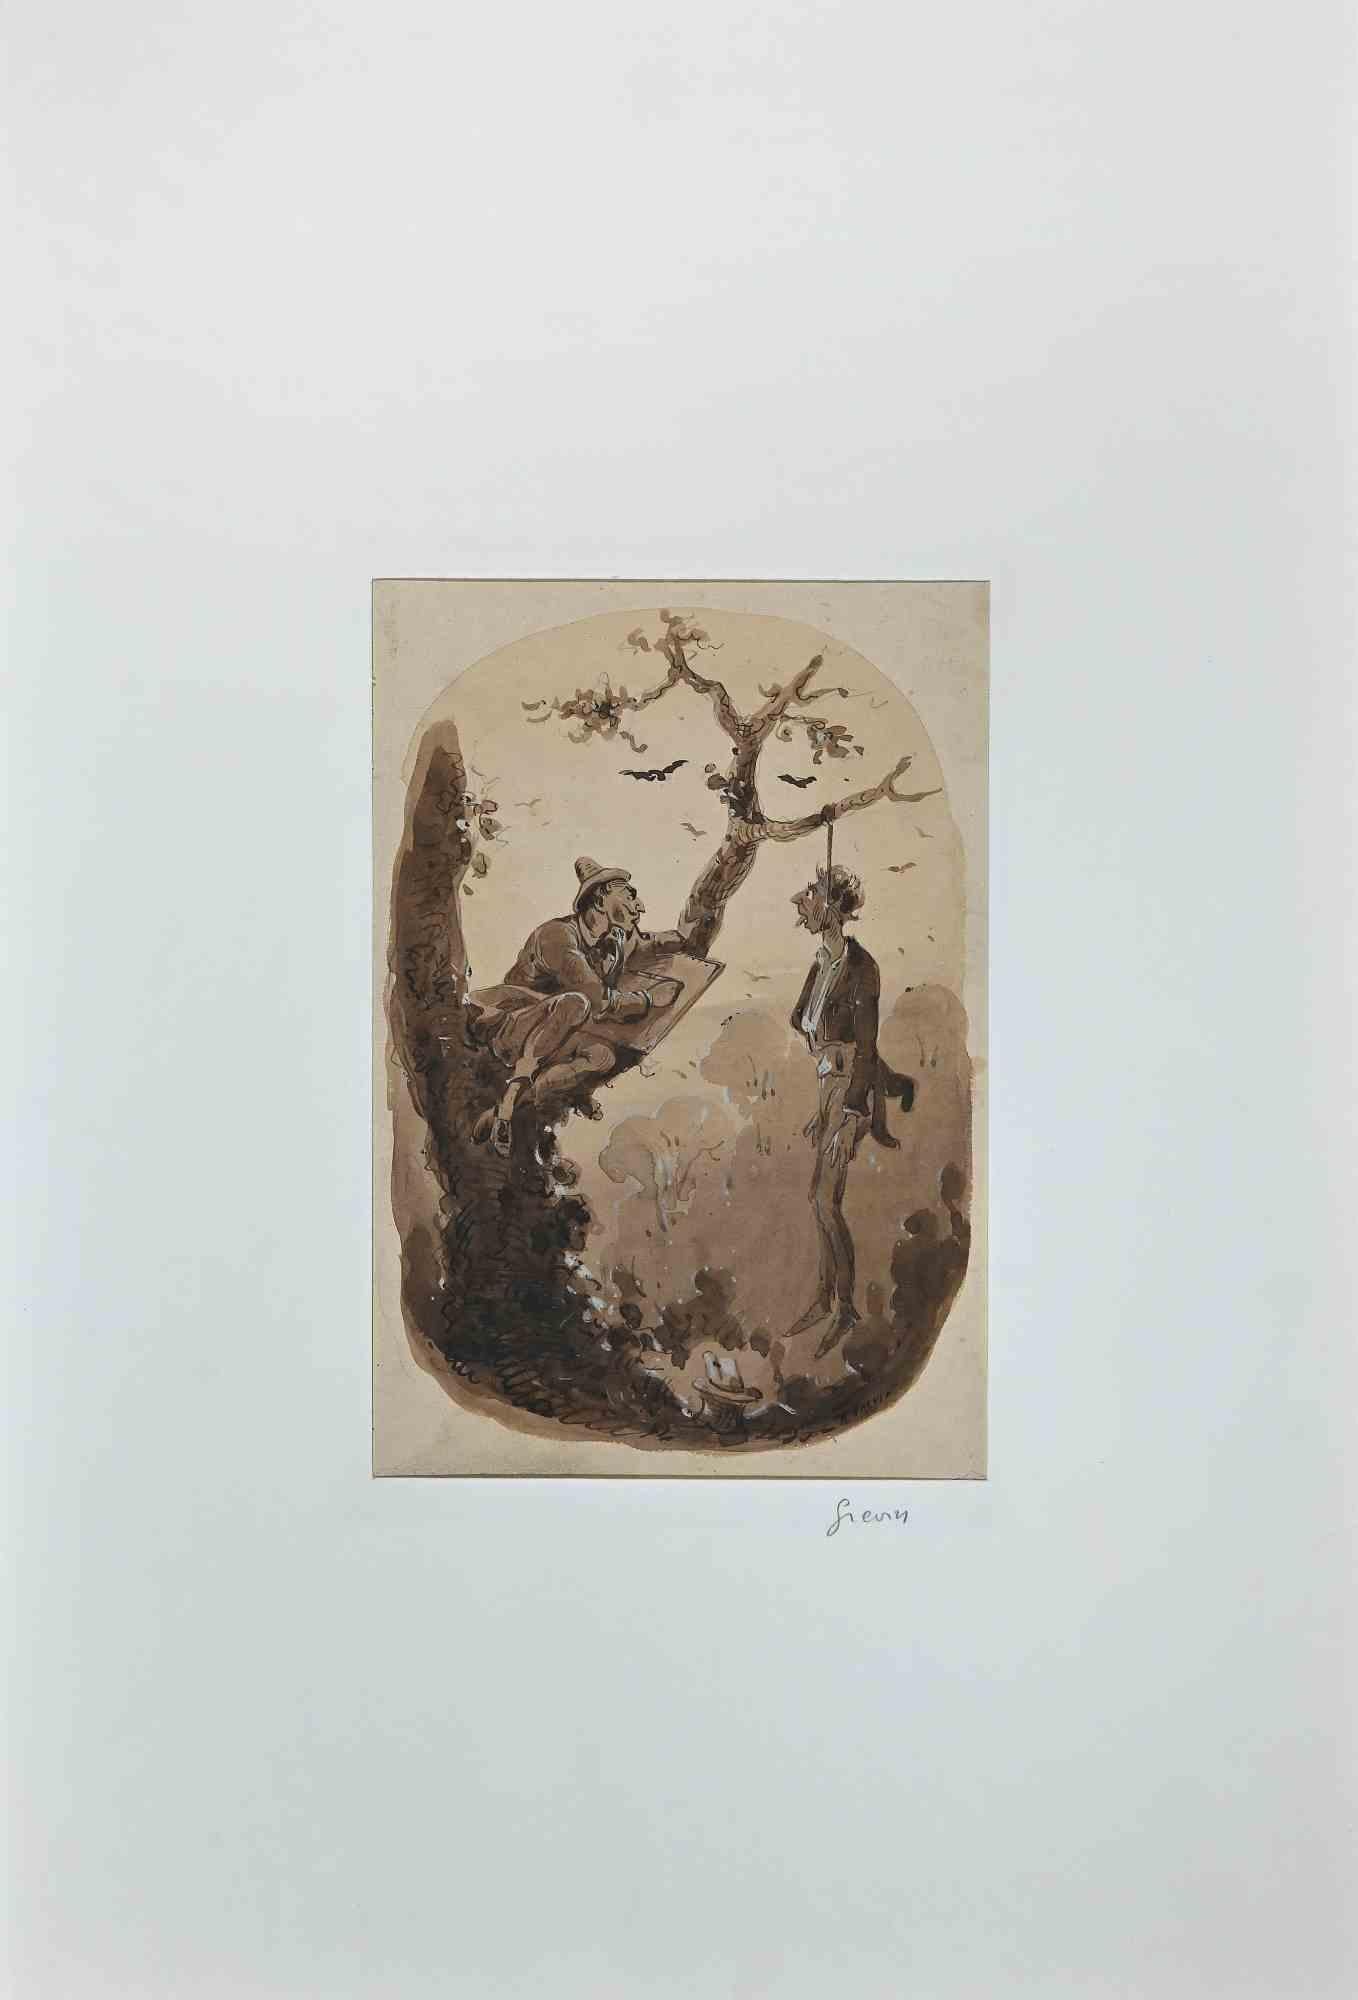 The Hanged -  Drawing by Alfred Grévin - Late-19 Century - Art by Alfred Grevin